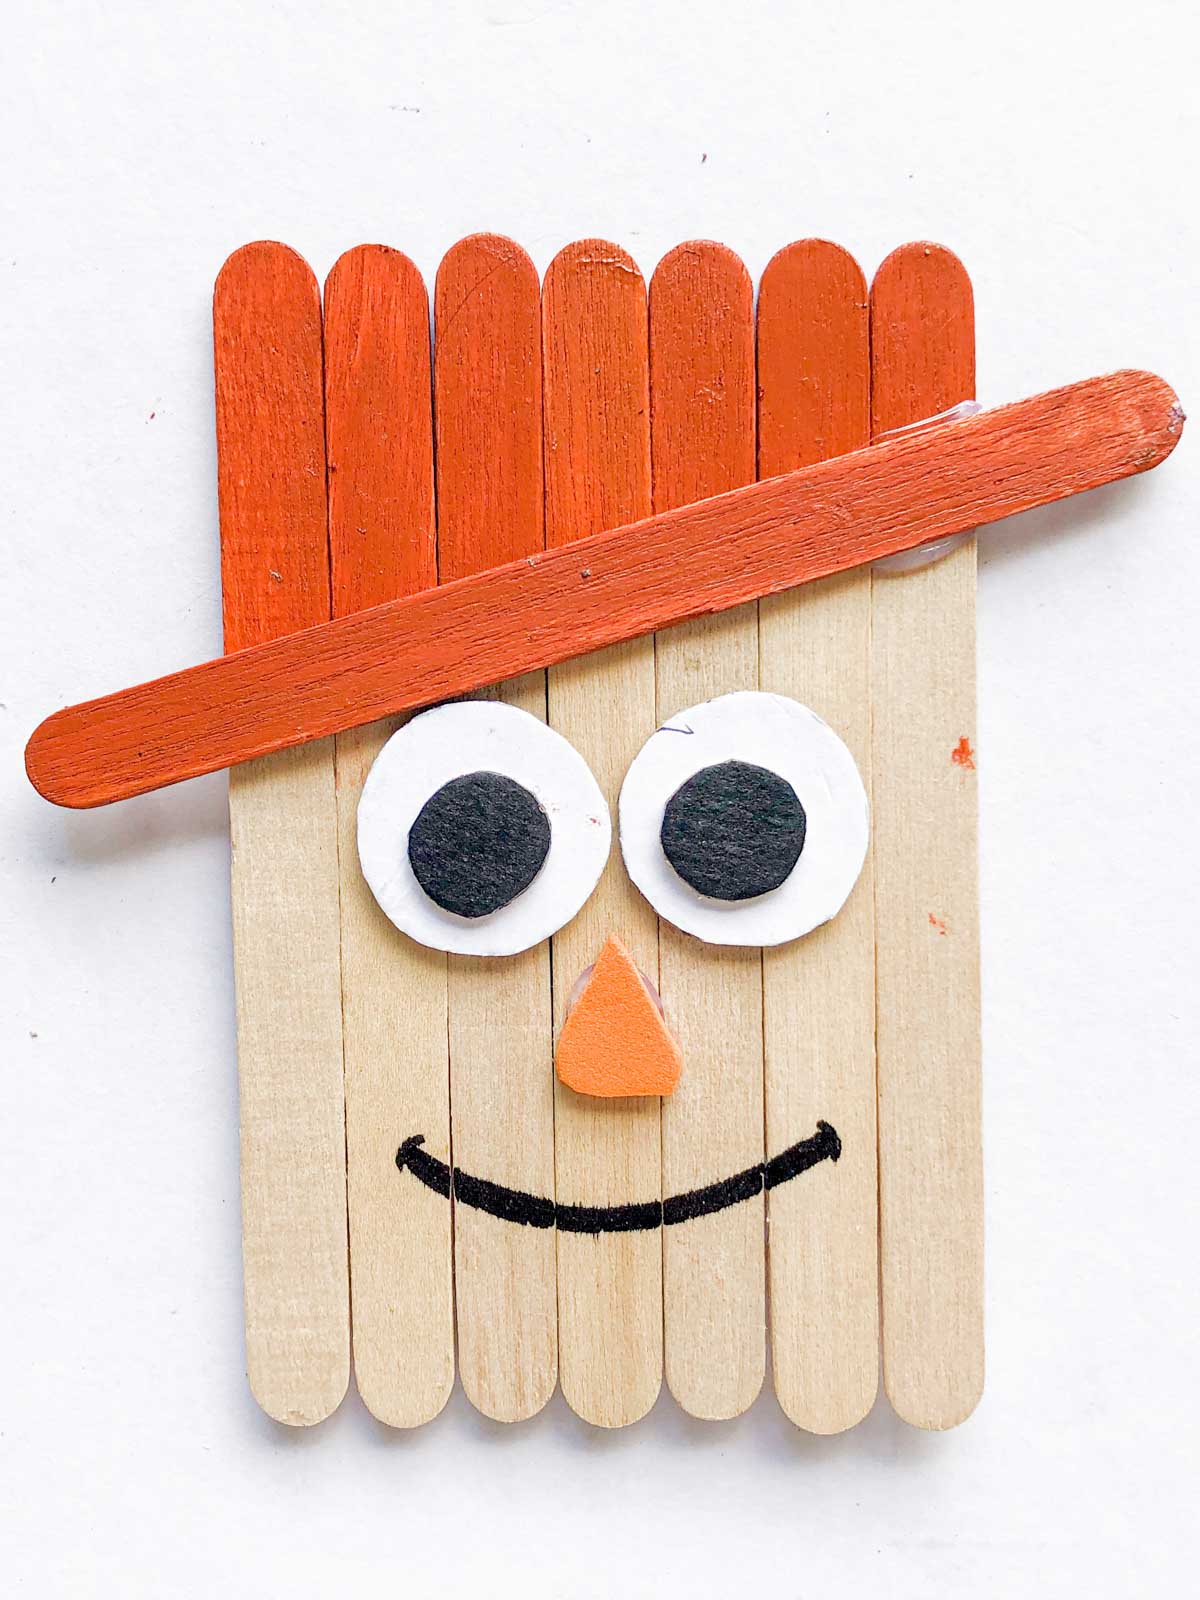 popsicle stick scarecrow with an orange hat